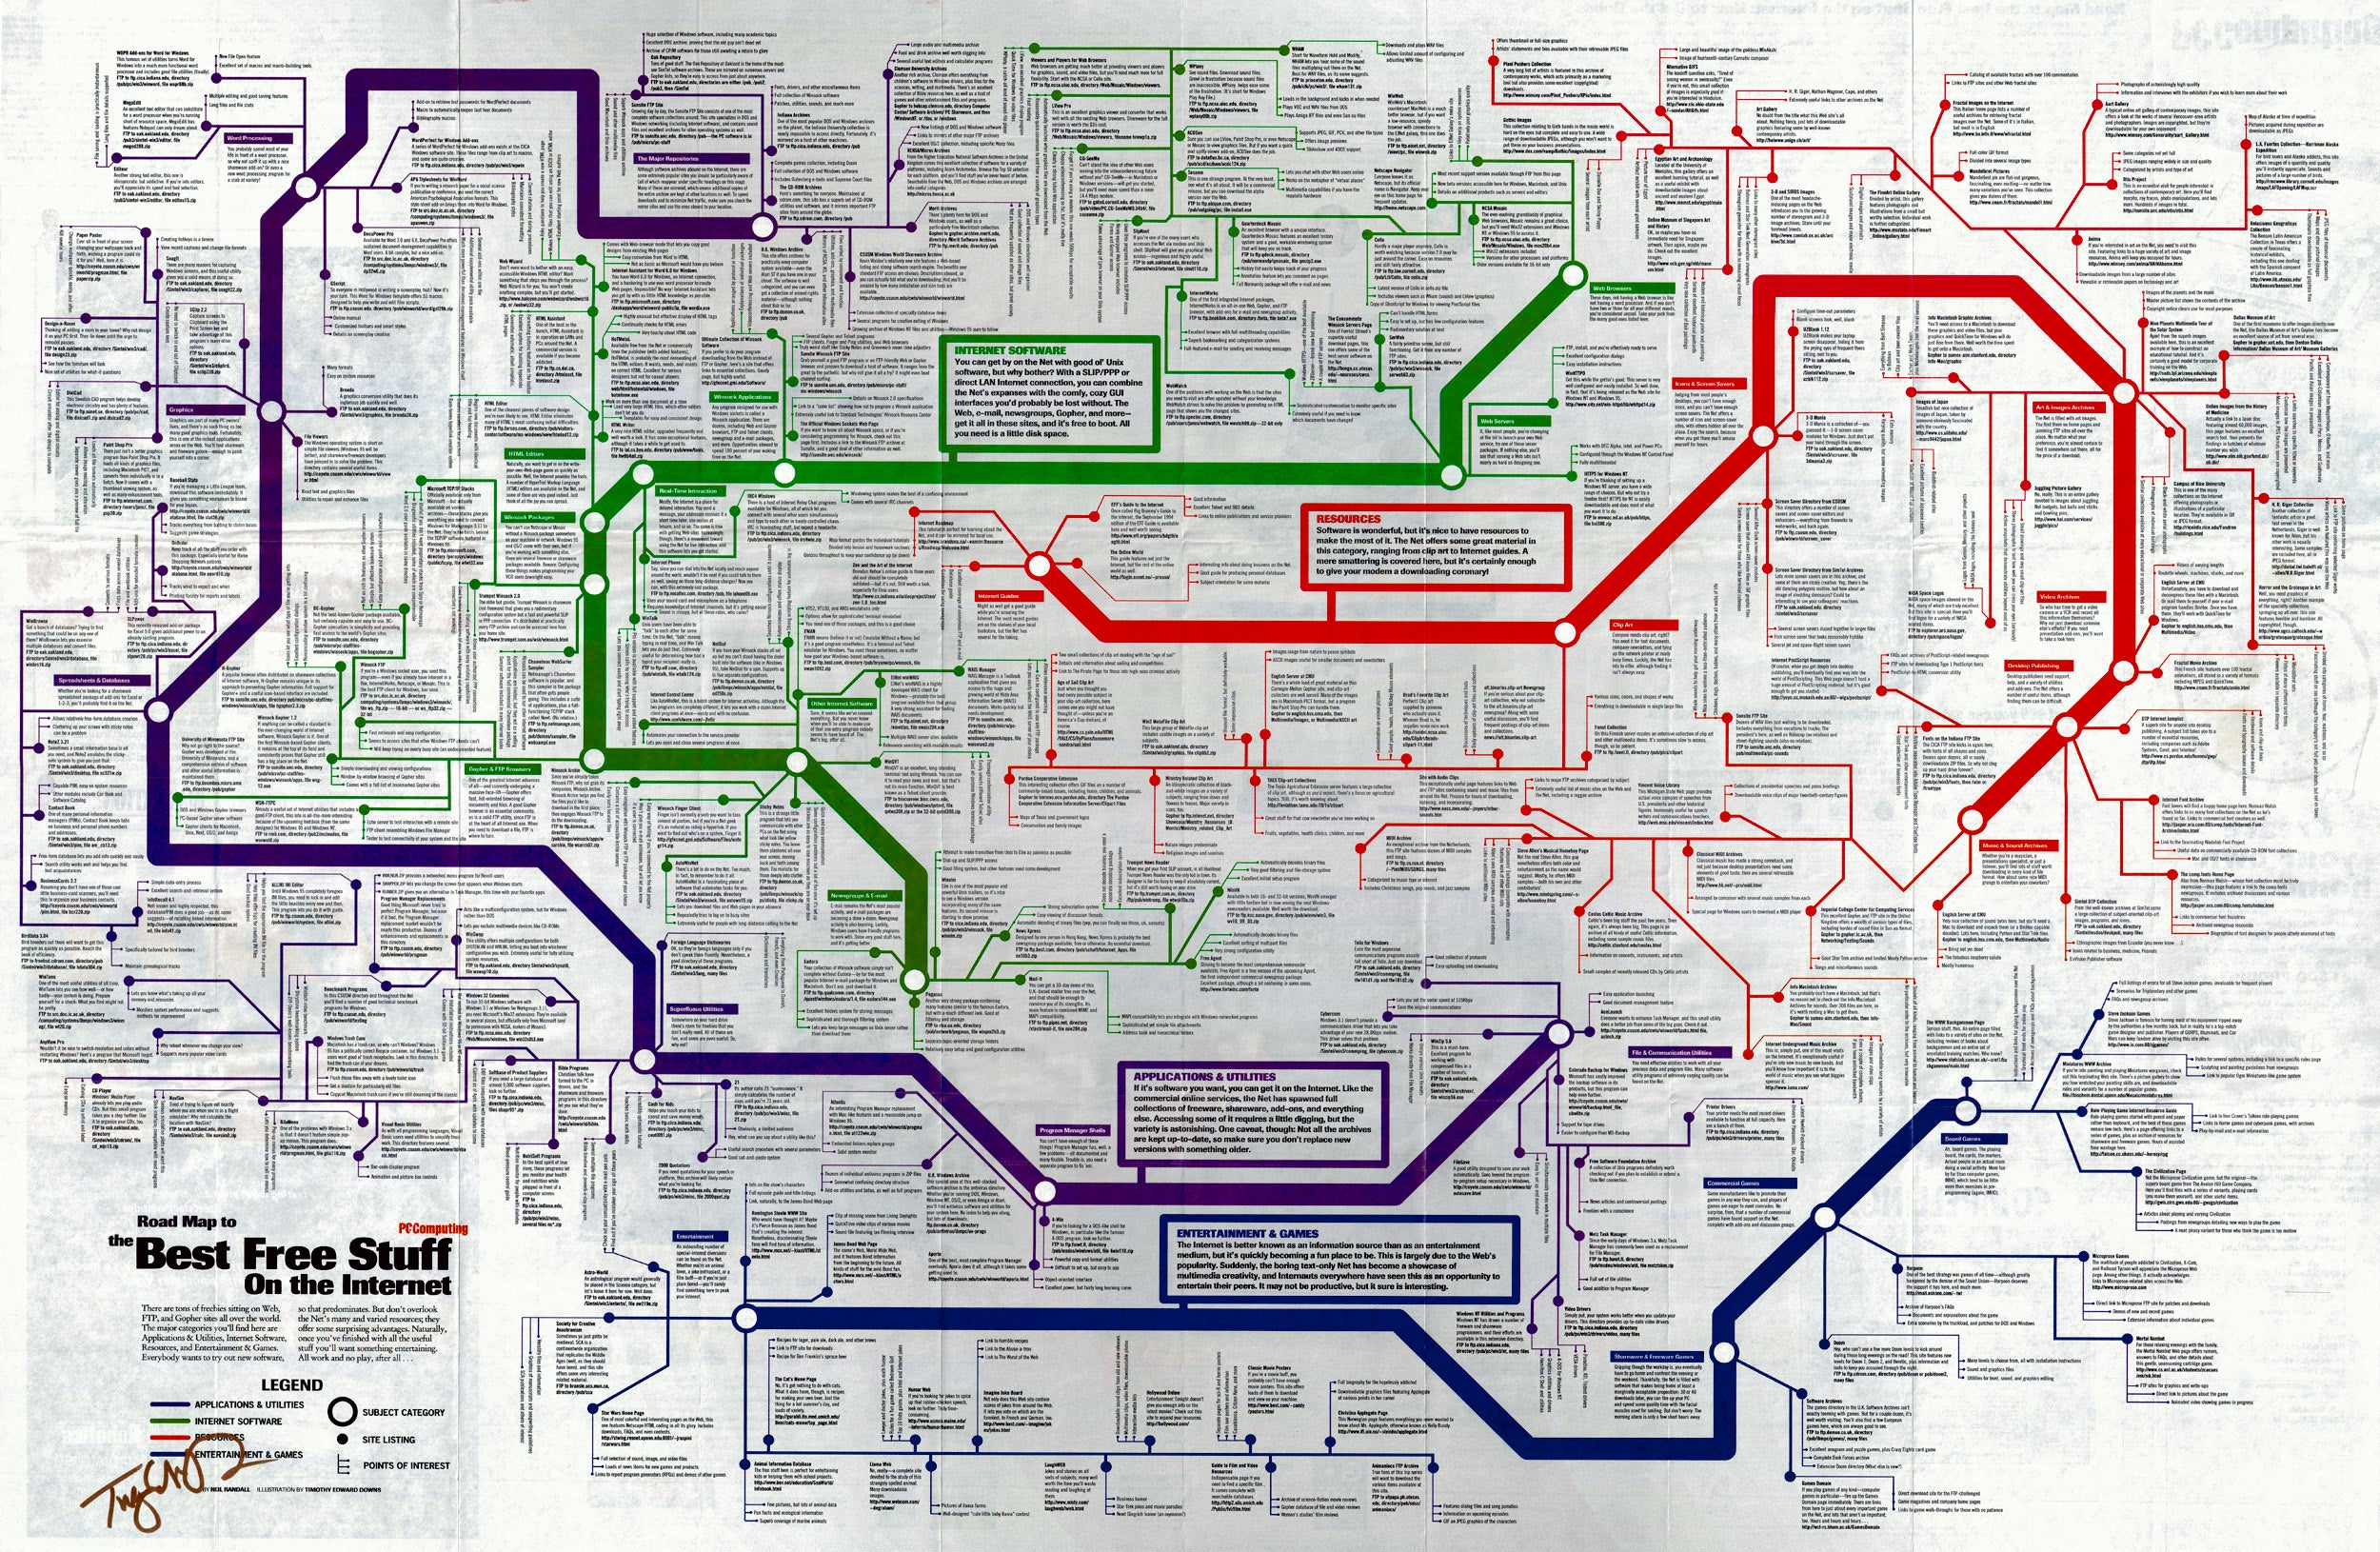 (Thematic - Internet) Road Map to the Best Free Stuff On the Internet